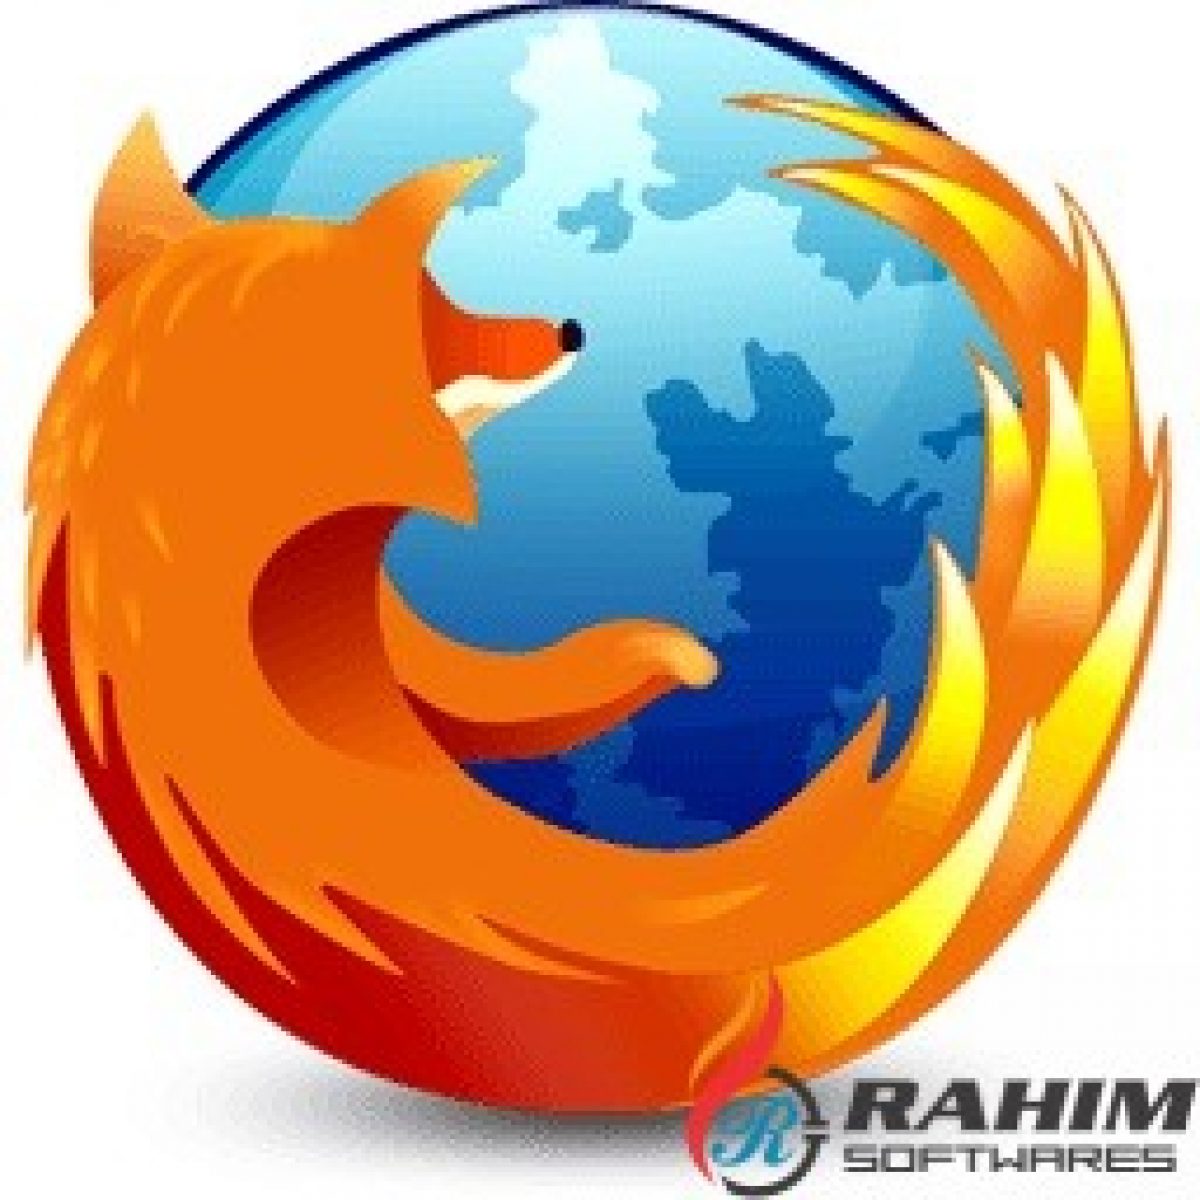 firefox browser download for mac